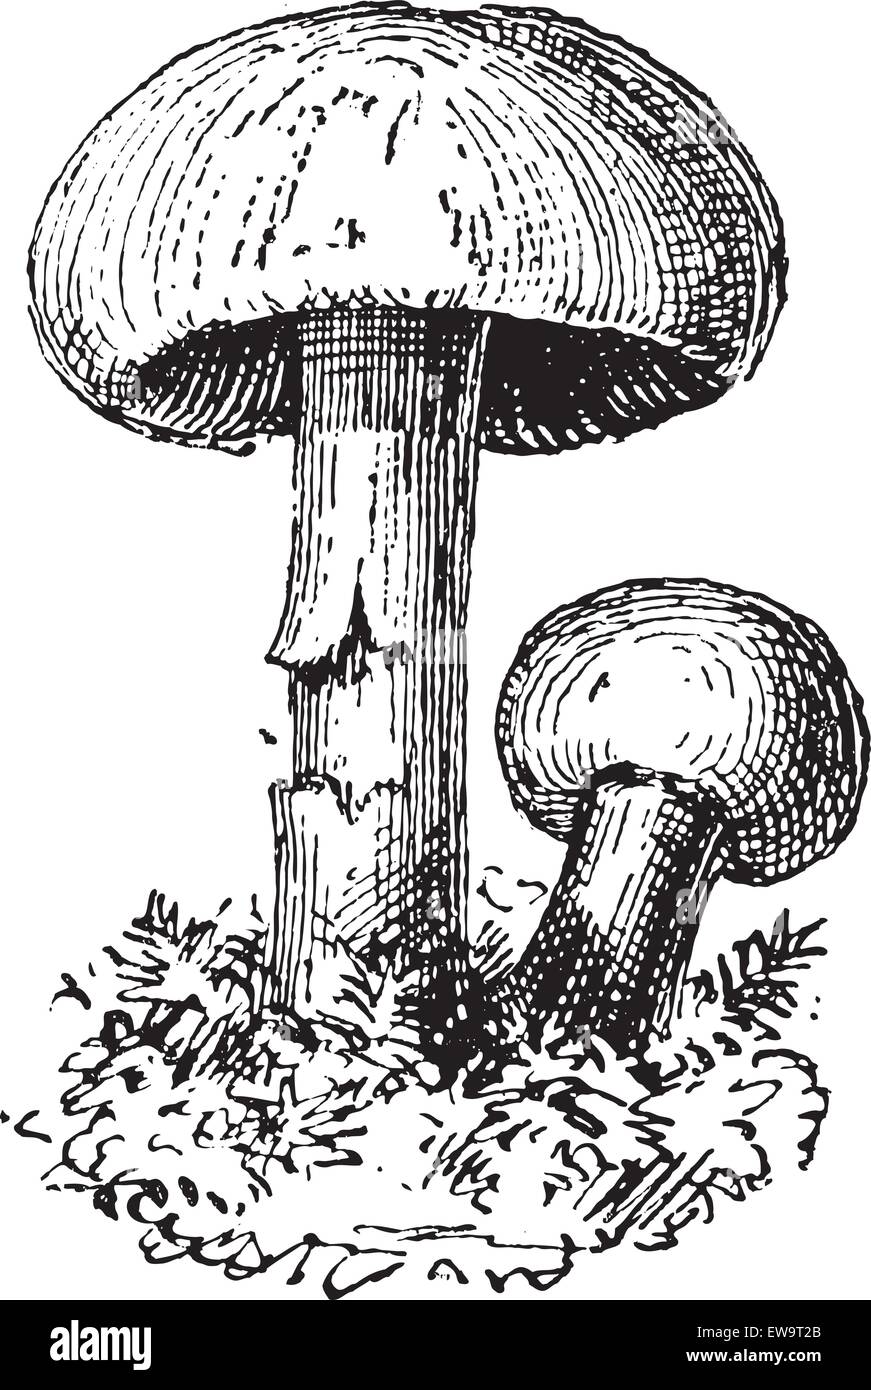 Fairy Ring Mushroom or Marasmius oreades, vintage engraved illustration. Dictionary of Words and Things - Larive and Fleury - 1895 Stock Vector